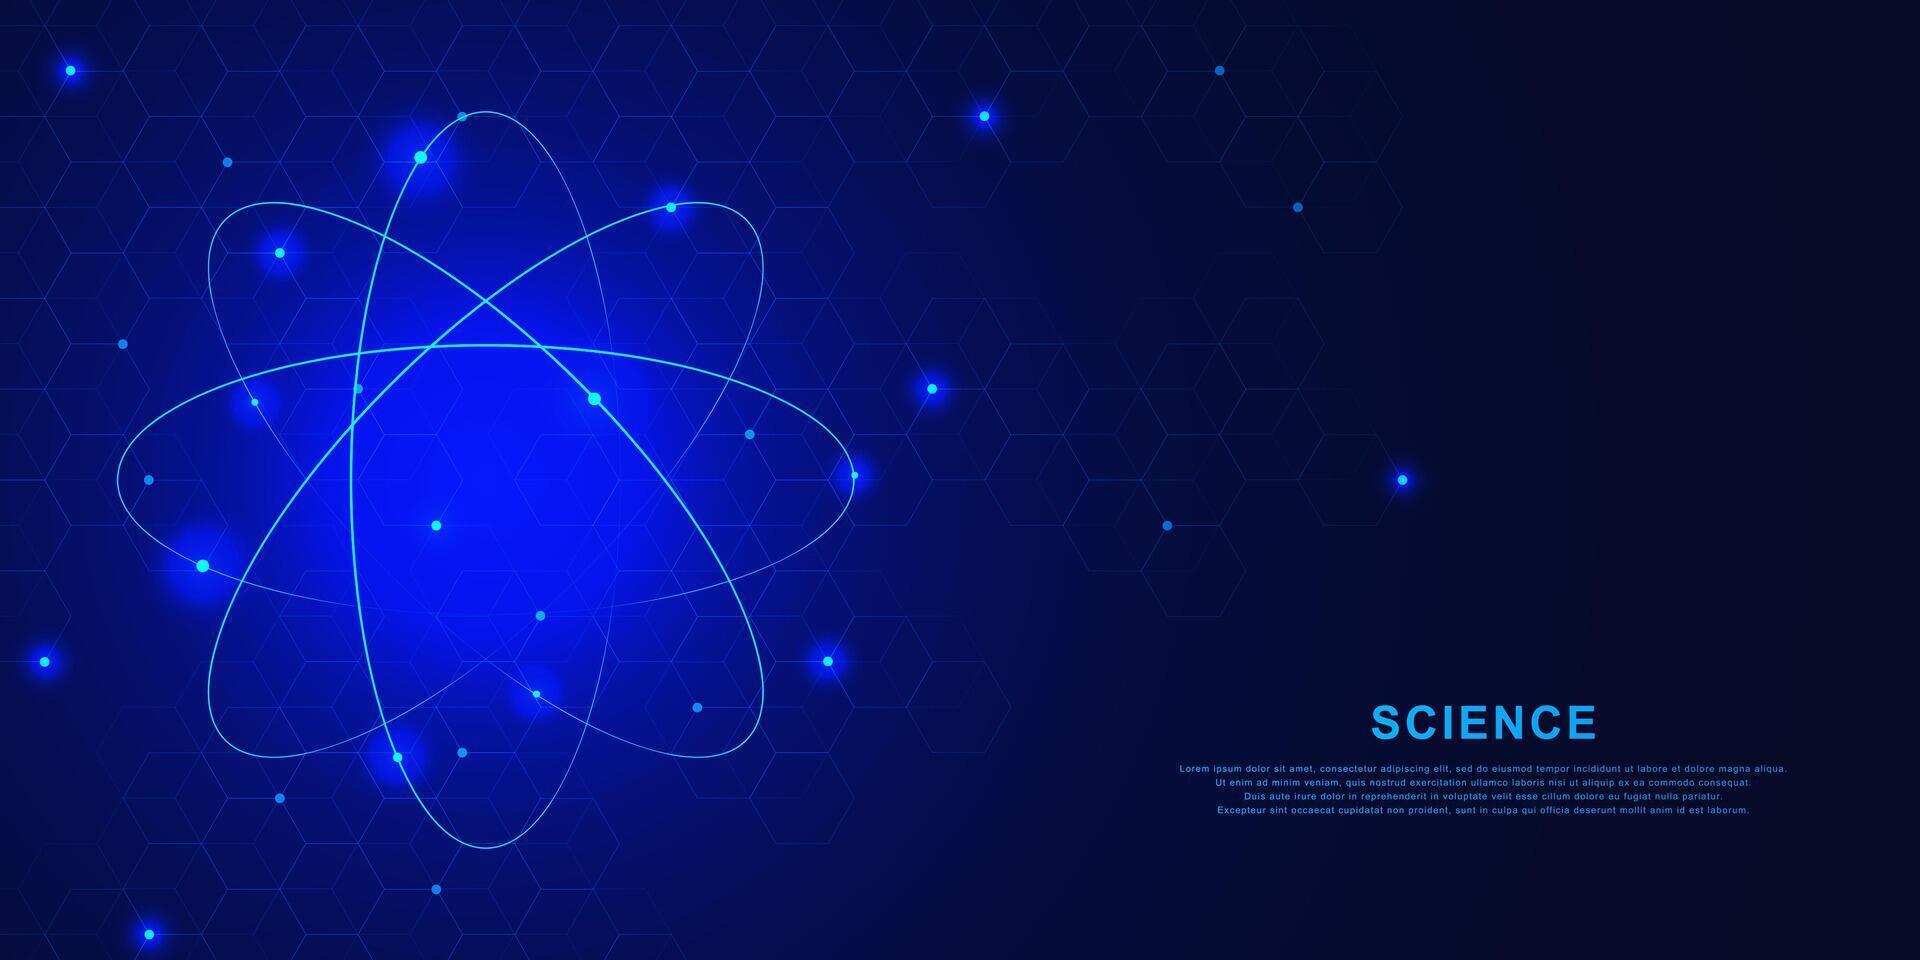 Nuclear atom hologram with molecular structure for science and technology concept on dark blue background. Vector illustration.